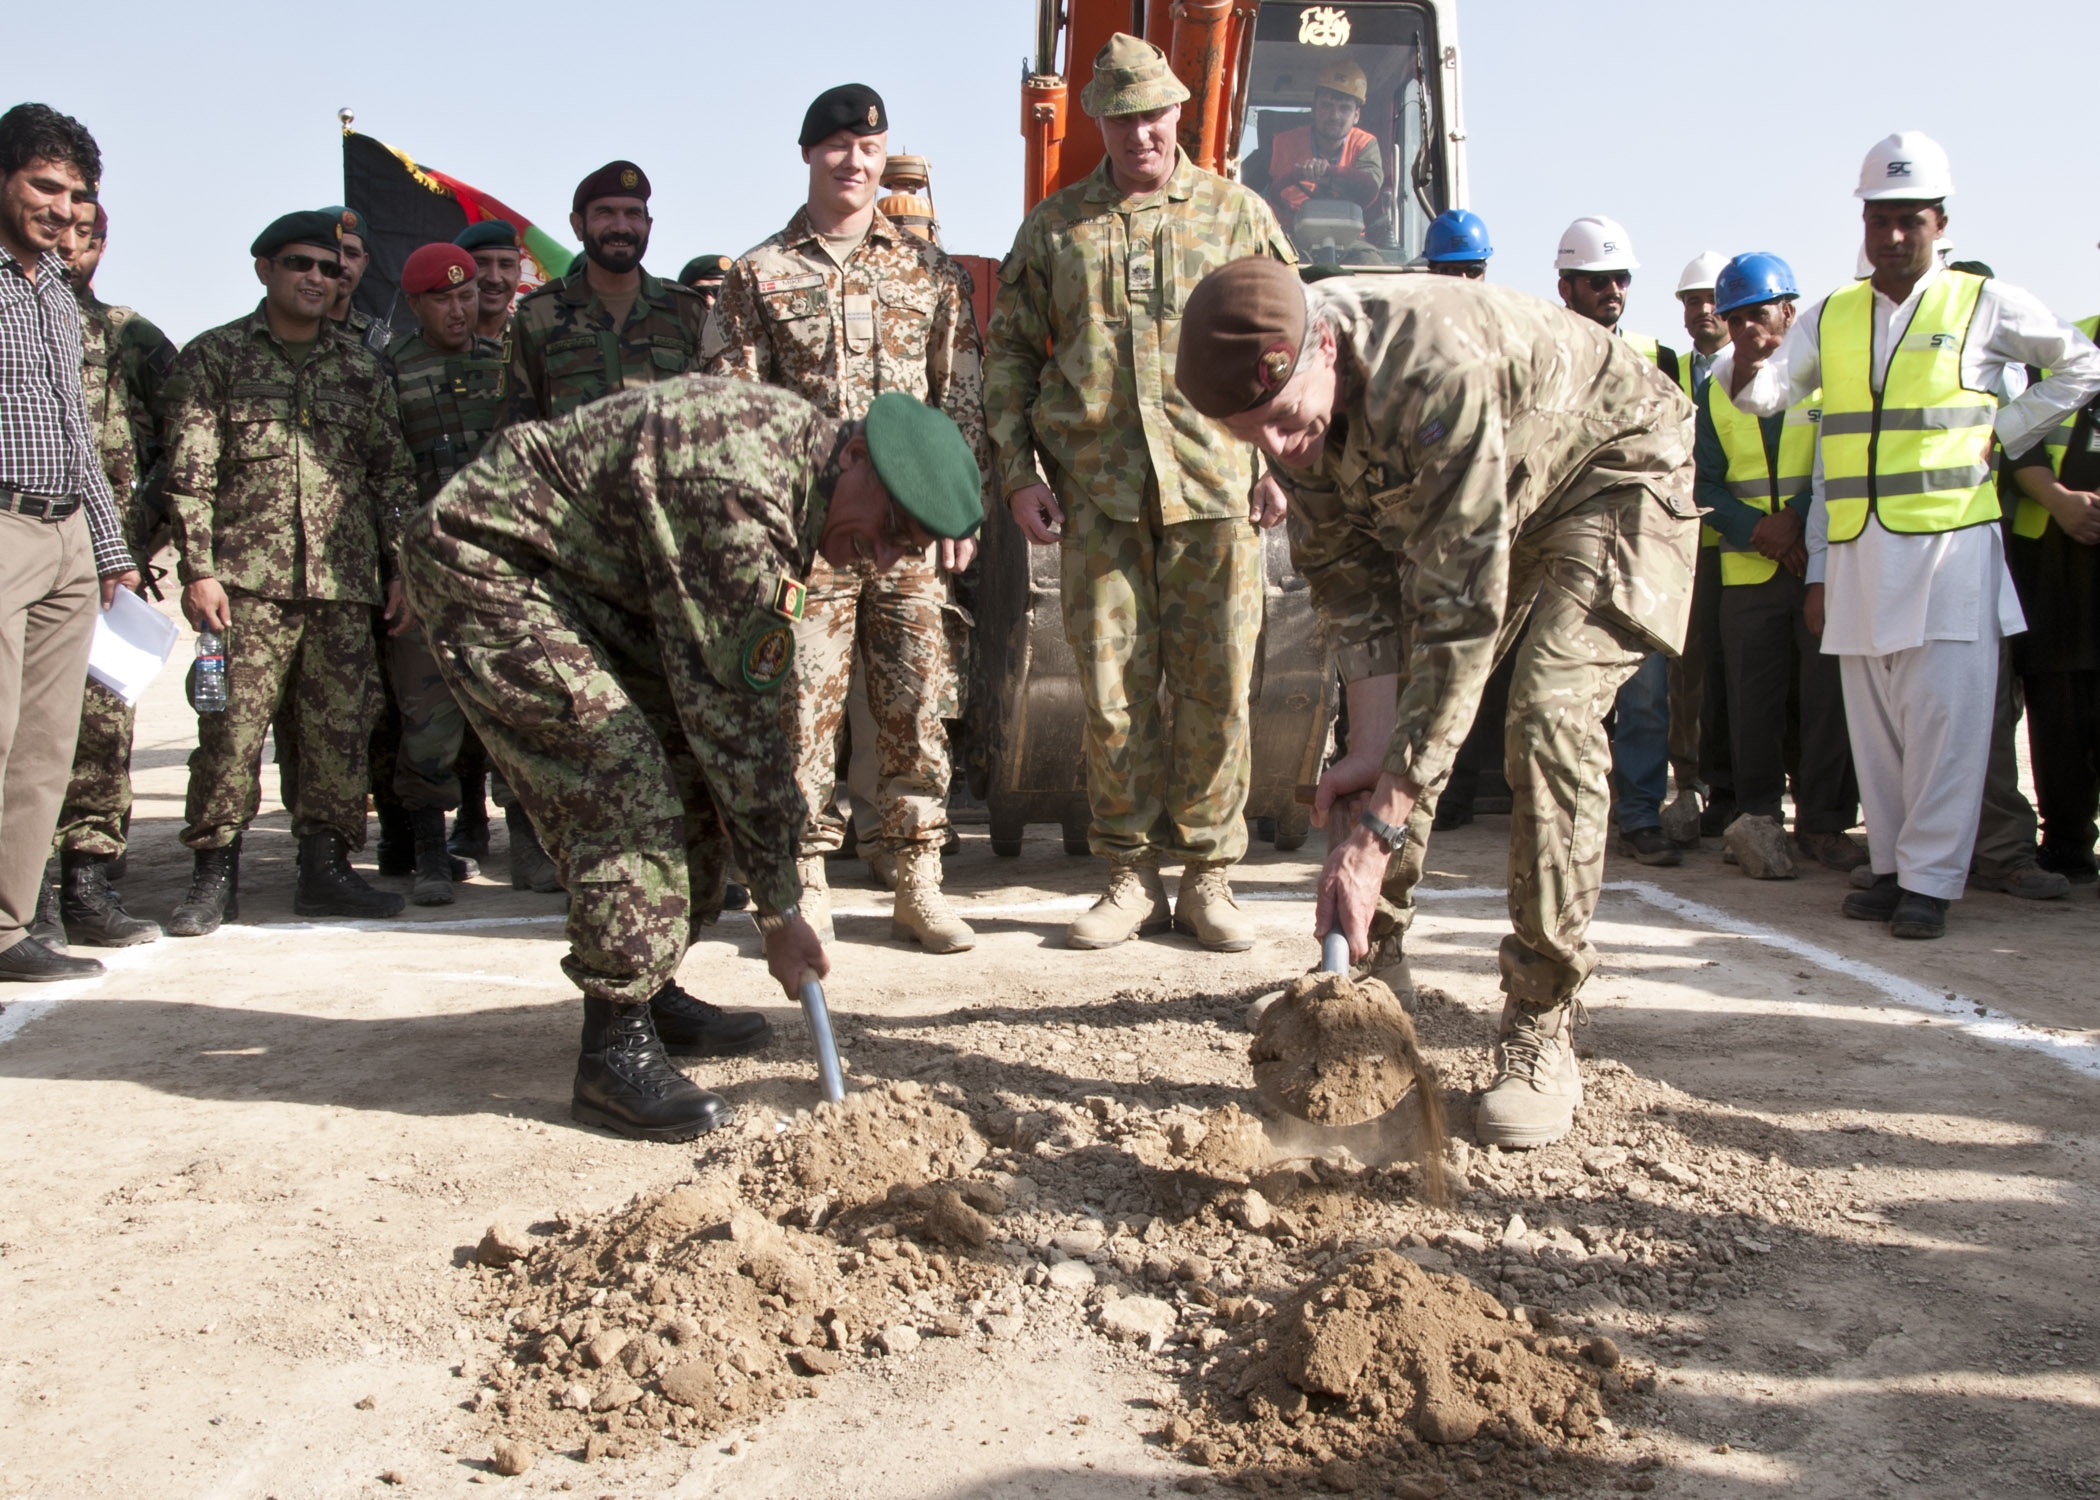 Gen. Sher Mohammad Karimi, Chief of General Staff for the ANA, and Lt. Gen. Adrian J. Bradshaw, Deputy Commander ISAF, dig the first holes ground breaking ceremony for the Afghanistan National Army Officers Academy, 11 Oct. Photo by MC3 (SW) Sean Weir, NTM-A Public Affairs.